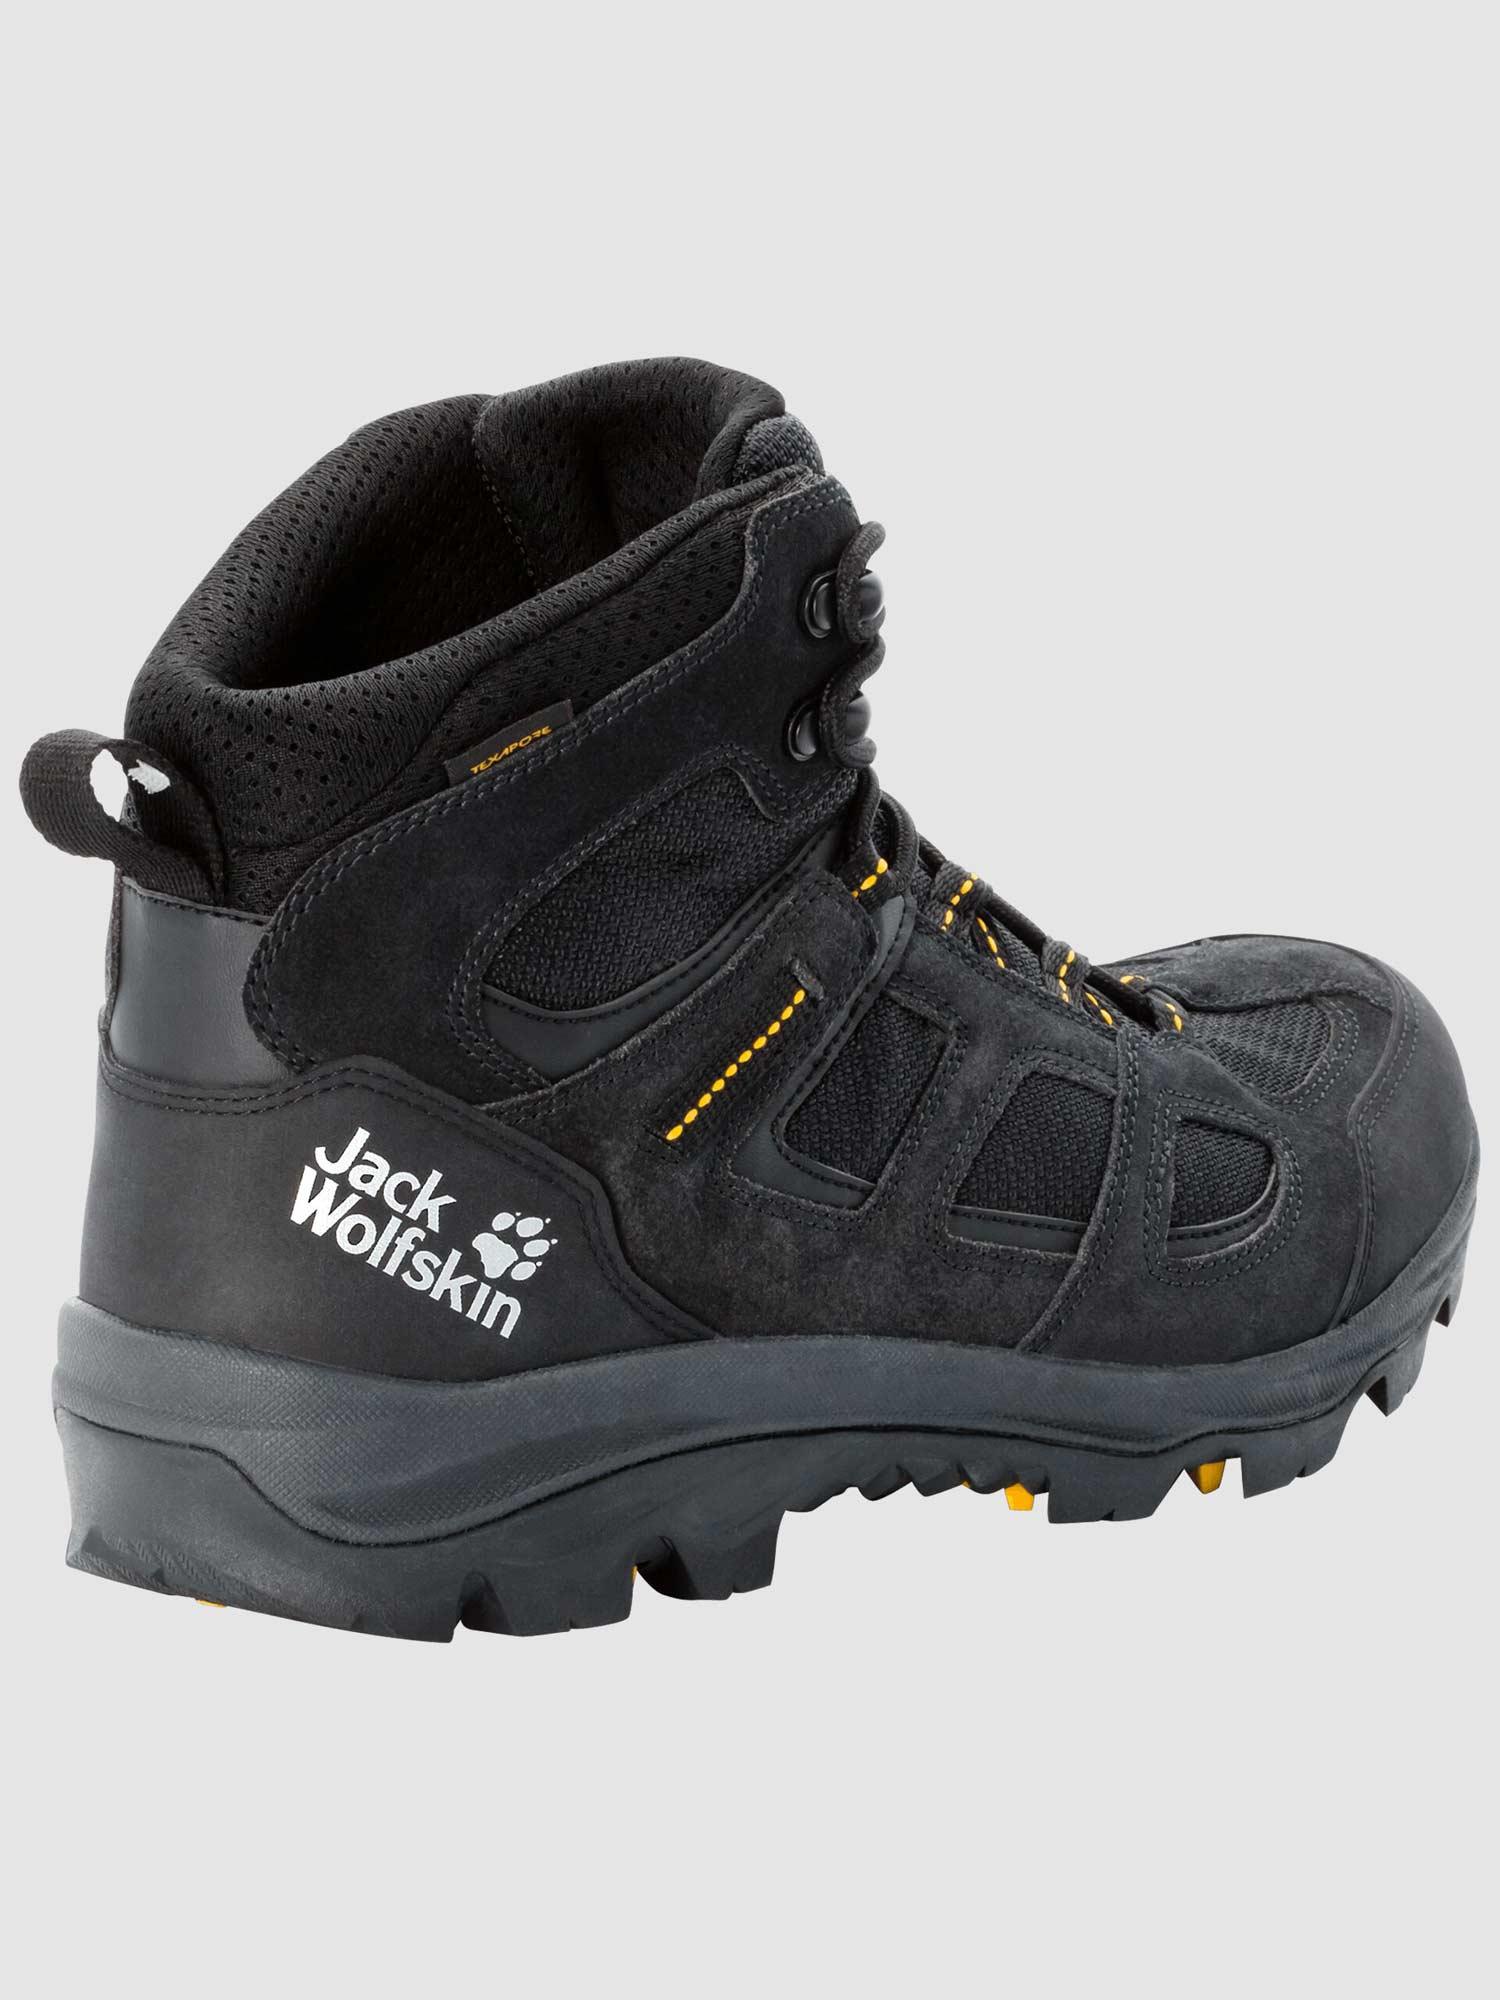 Selected image for JACK WOLFSKIN Muške cipele Vojo 3 Texapore Mid crne